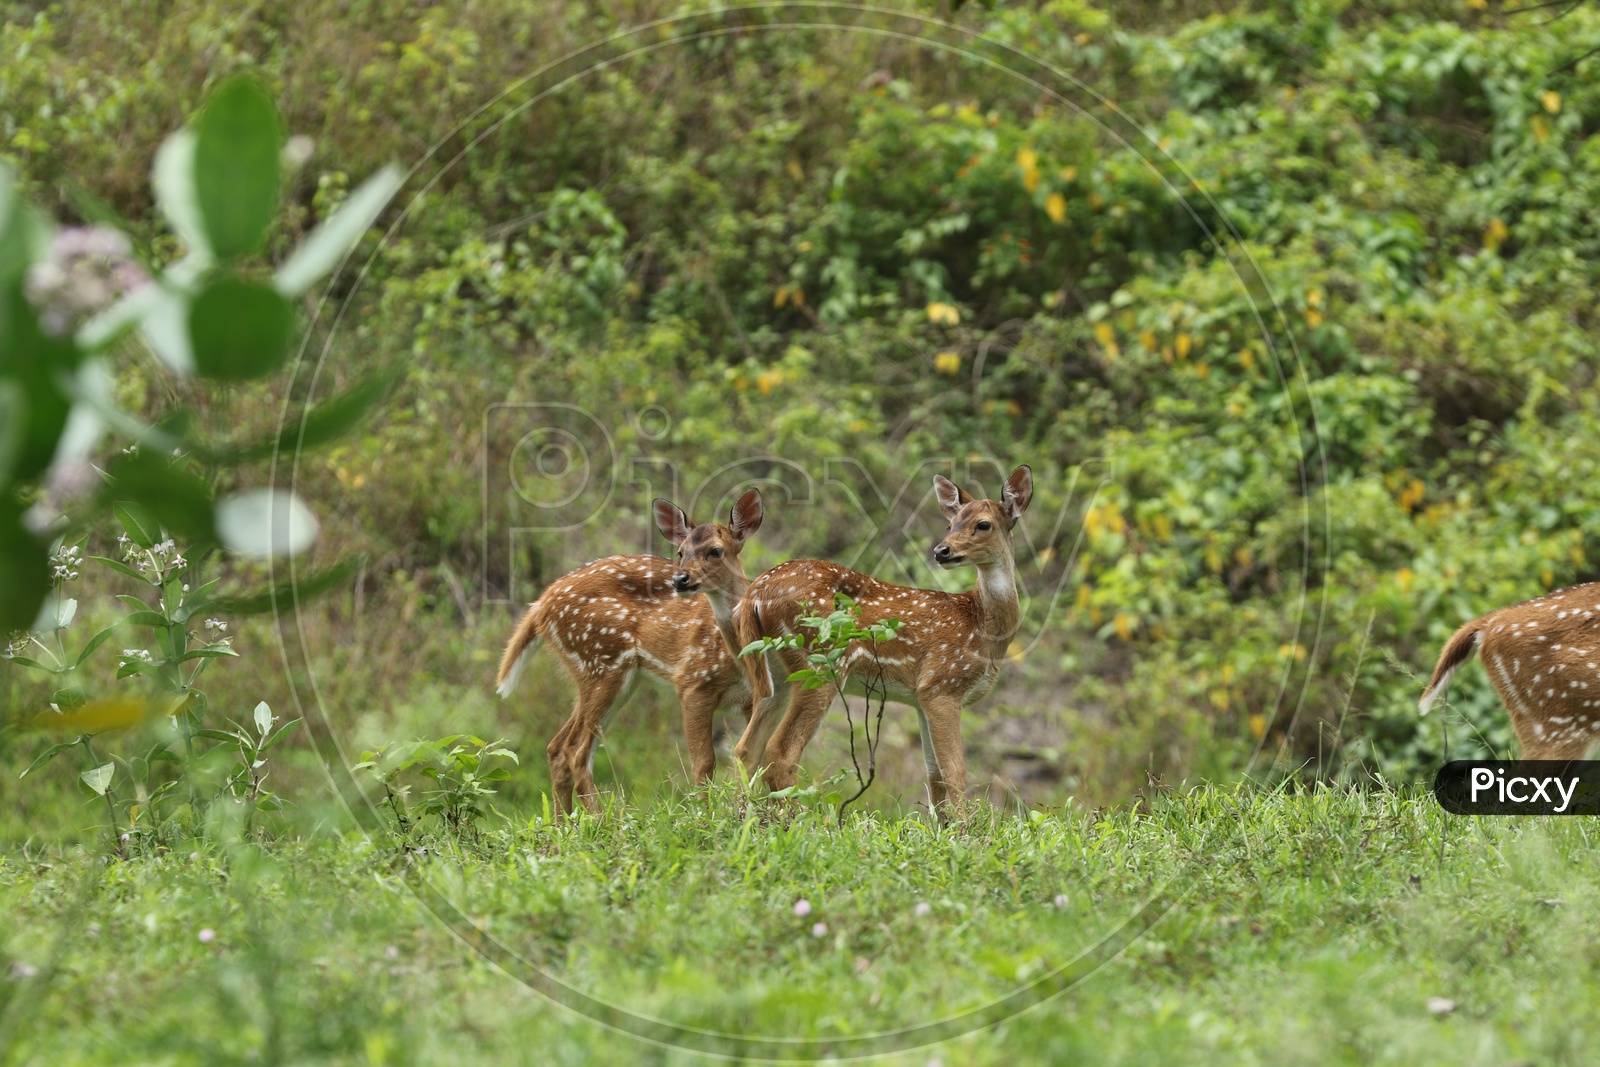 Deers in a forest Reserve